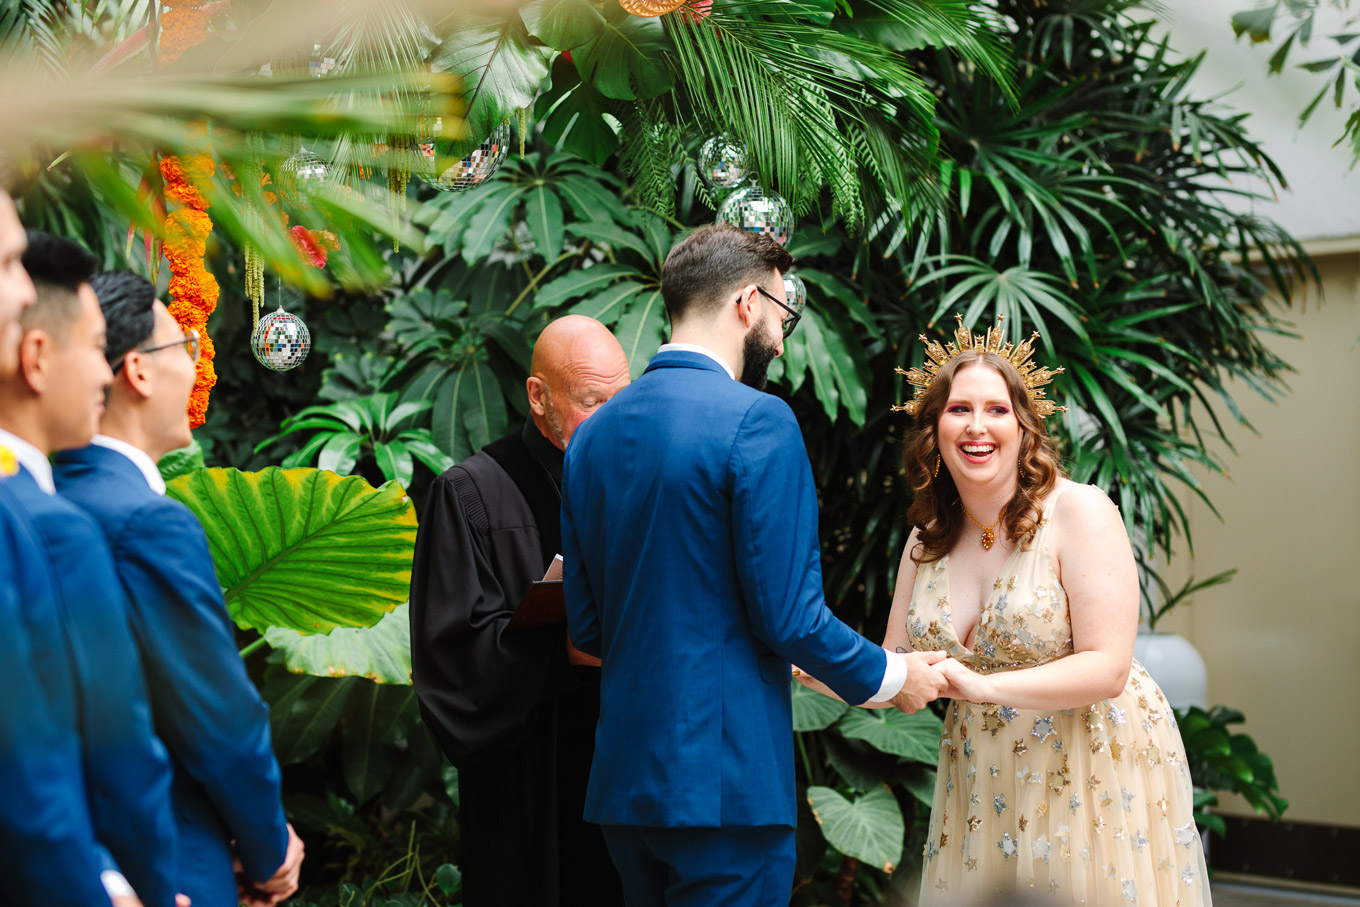 Bride and groom laughing during wedding ceremony | Colorful Downtown Los Angeles Valentine Wedding | Los Angeles wedding photographer | #losangeleswedding #colorfulwedding #DTLA #valentinedtla   Source: Mary Costa Photography | Los Angeles